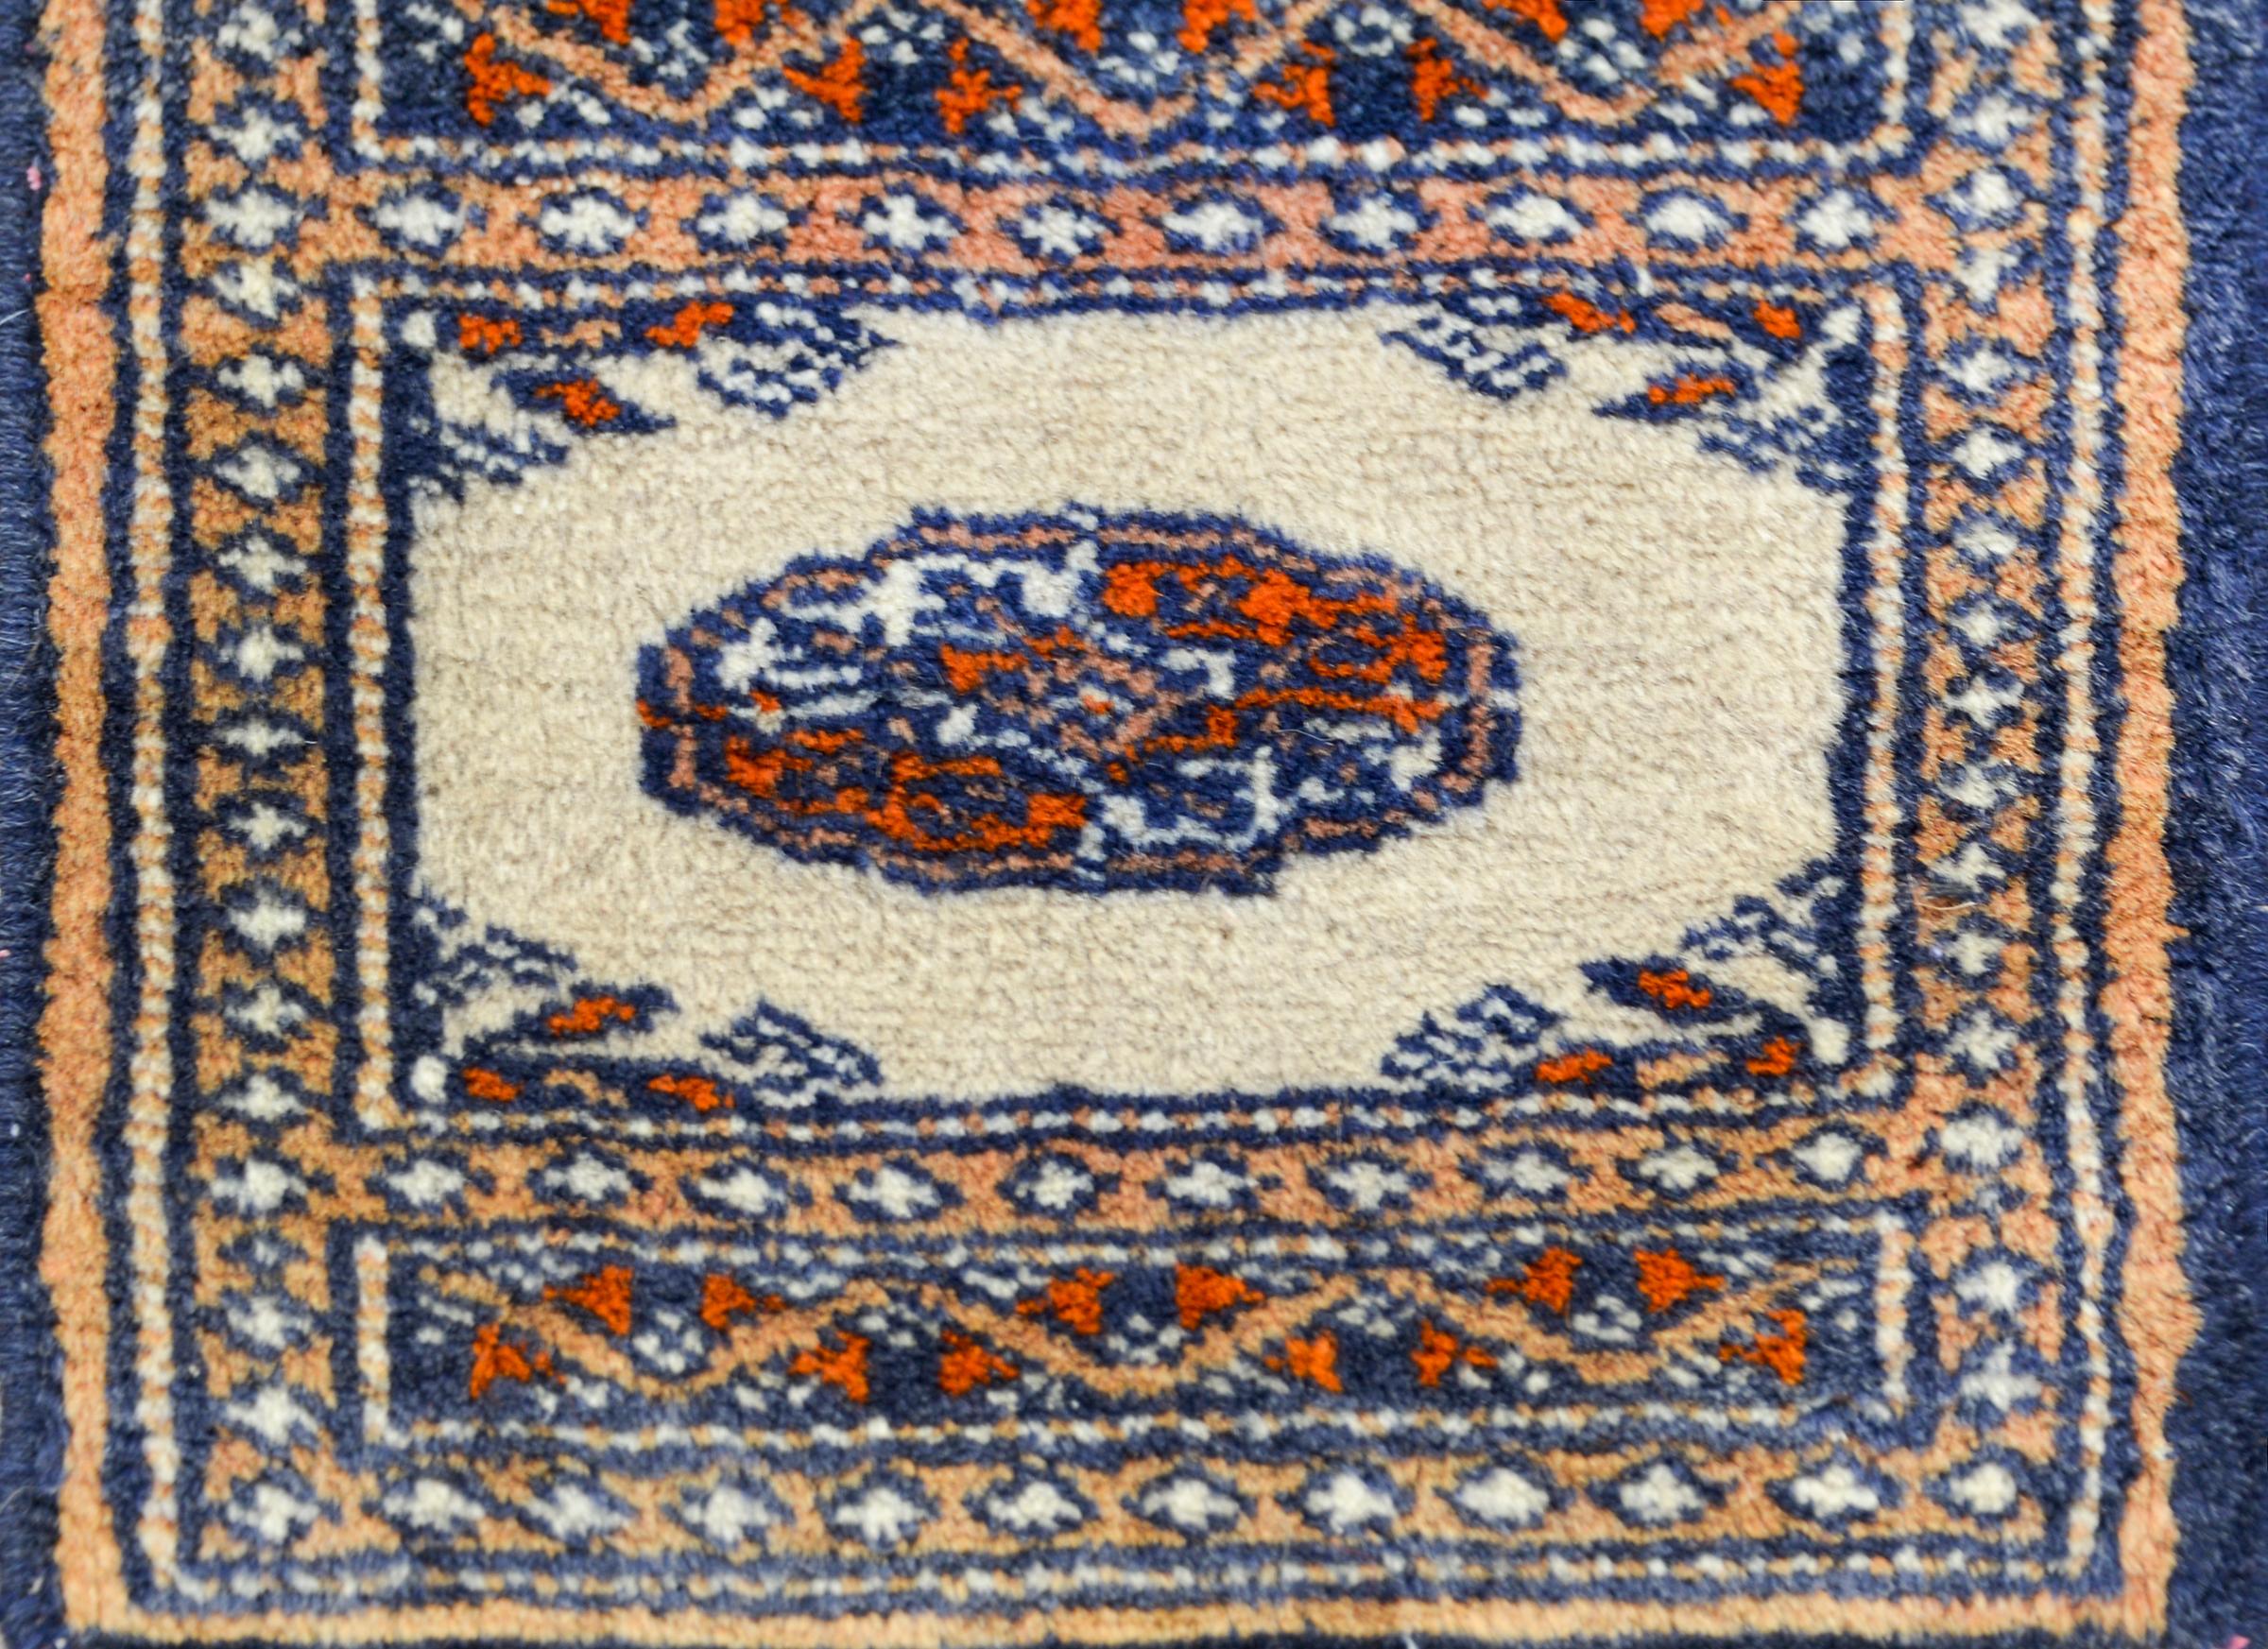 Petite Mid-20th Century Bakhara Rug In Good Condition For Sale In Chicago, IL